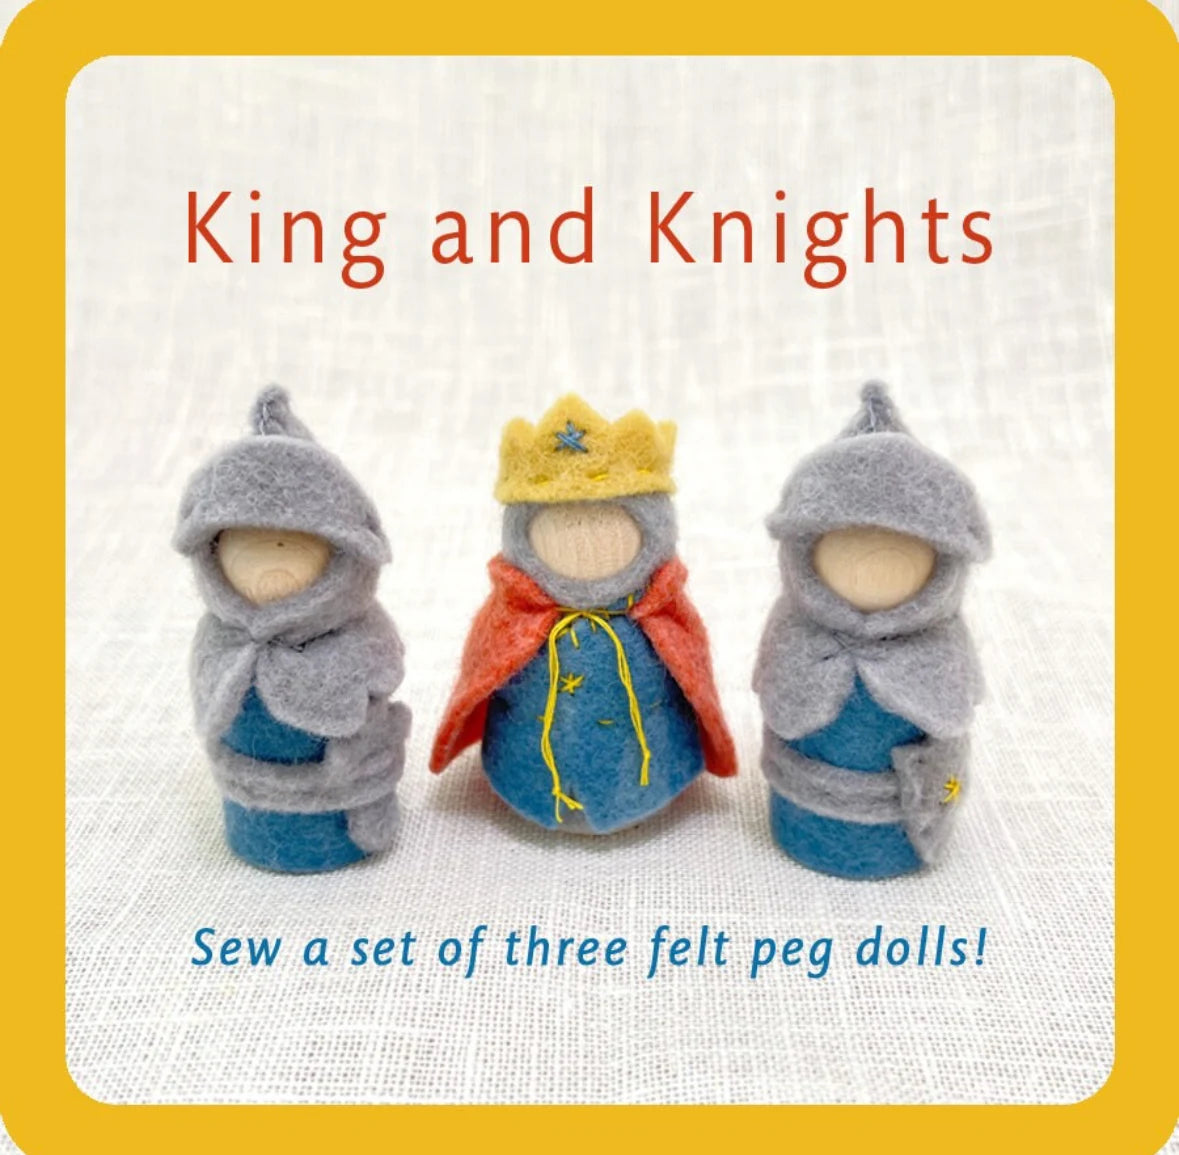 Peg Doll Kit for King and Knights